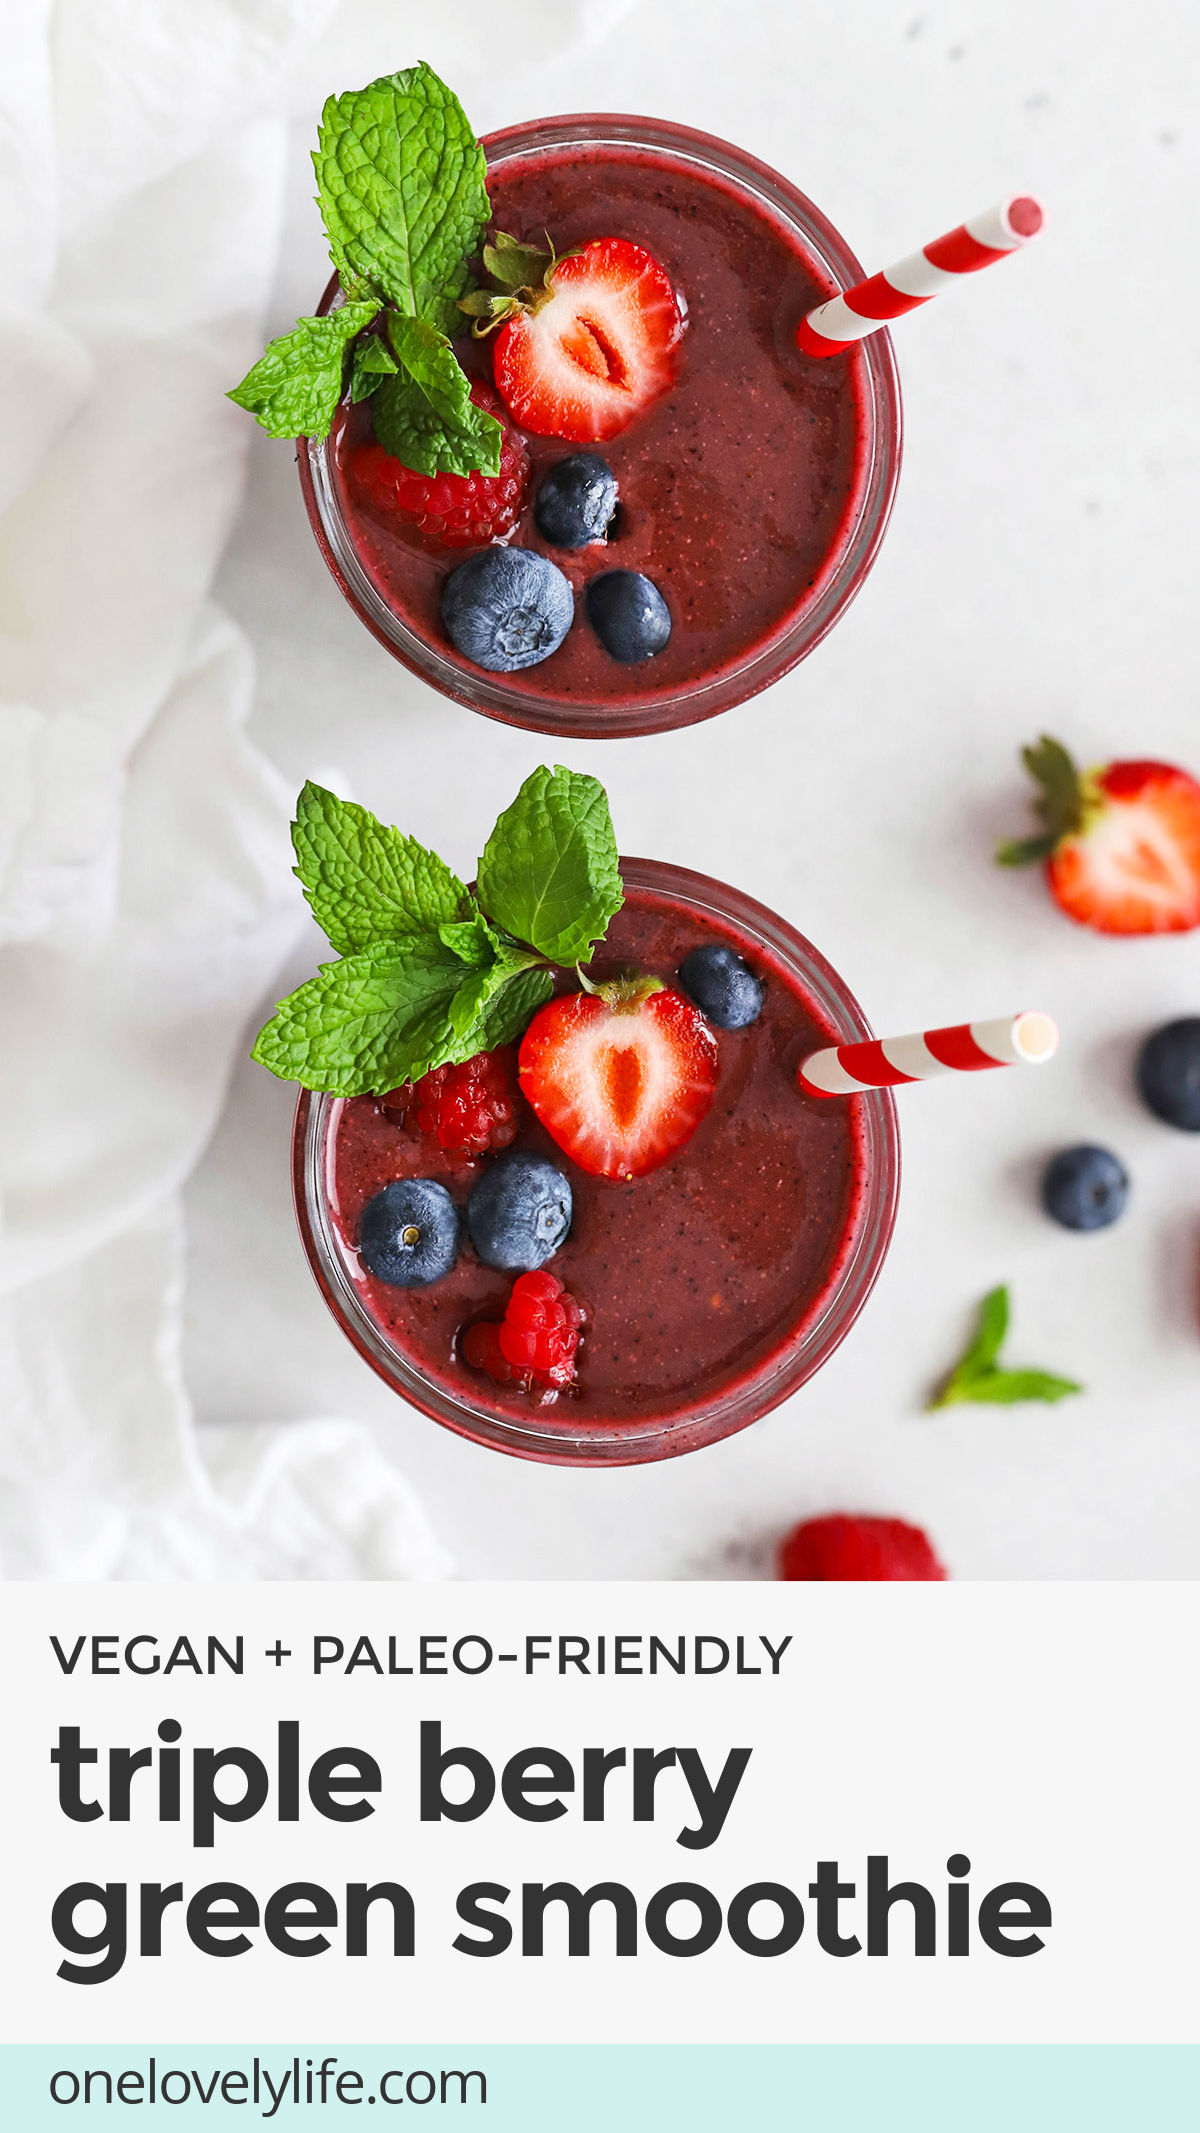 This Berry Green Smoothie - This kid-friendly recipe is a perfect intro to green smoothies. It's fresh, sweet & delicious! (paleo & vegan) // kid friendly smoothie // kids green smoothie // kids berry smoothie // healthy smoothie recipe // berry smoothie recipe / green smoothie with berries / vegan green smoothie / paleo smoothie / red smoothie / purple smoothie / triple berry smoothie / triple berry green smoothie